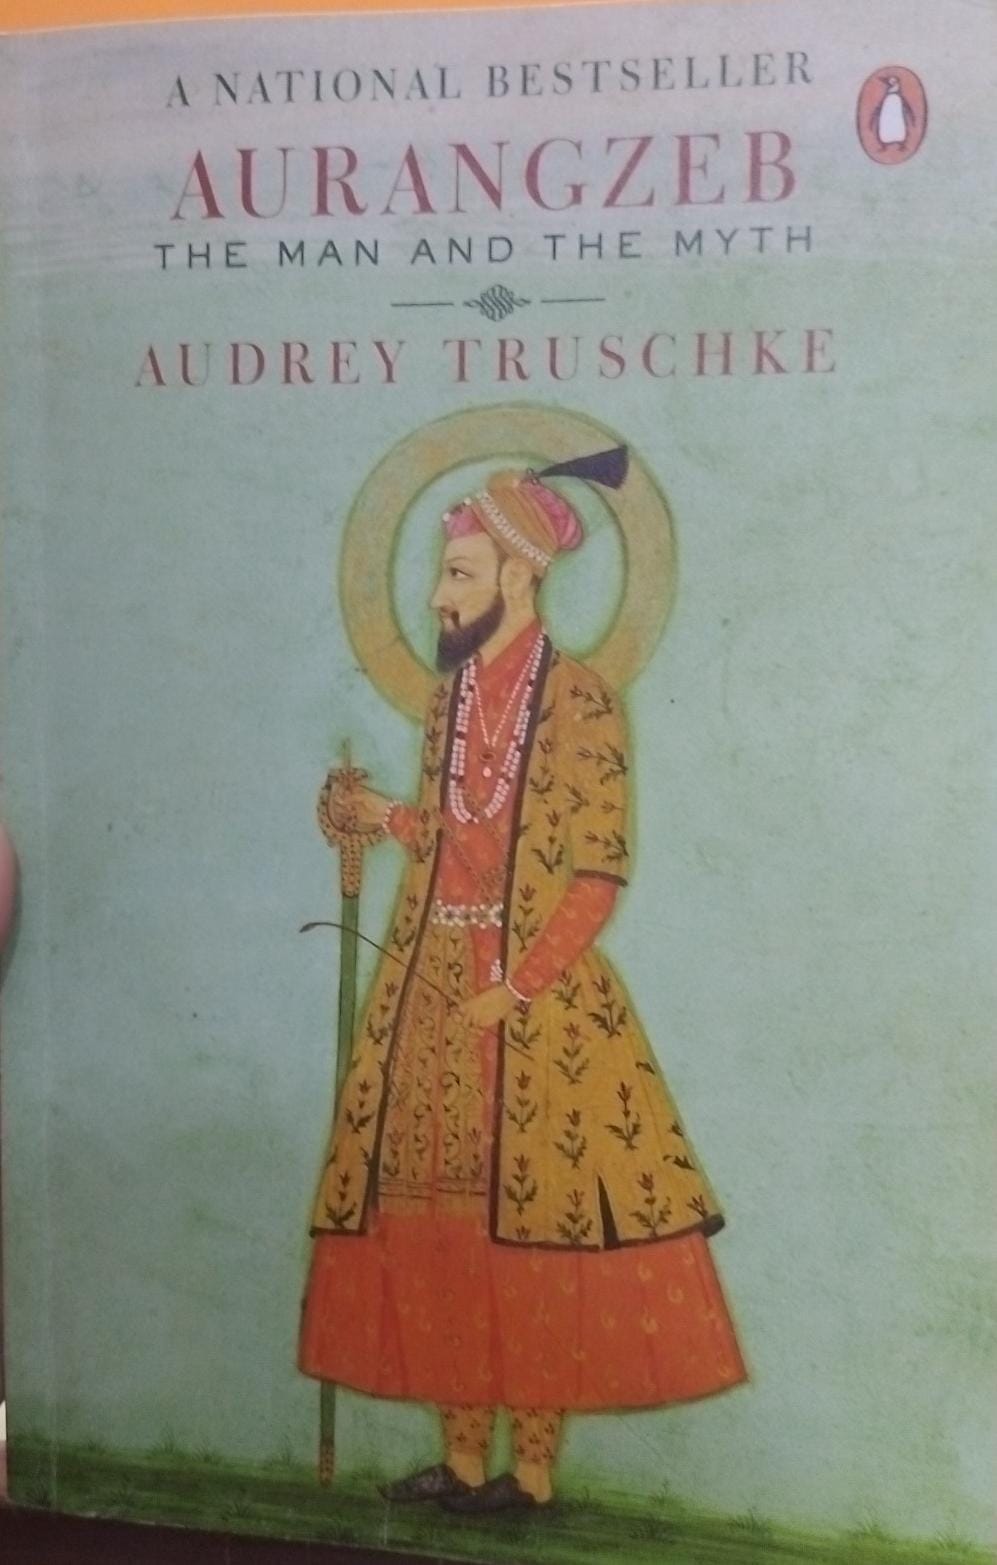 (Used) Aurangzeb: The Man and the Myth (Papercover)